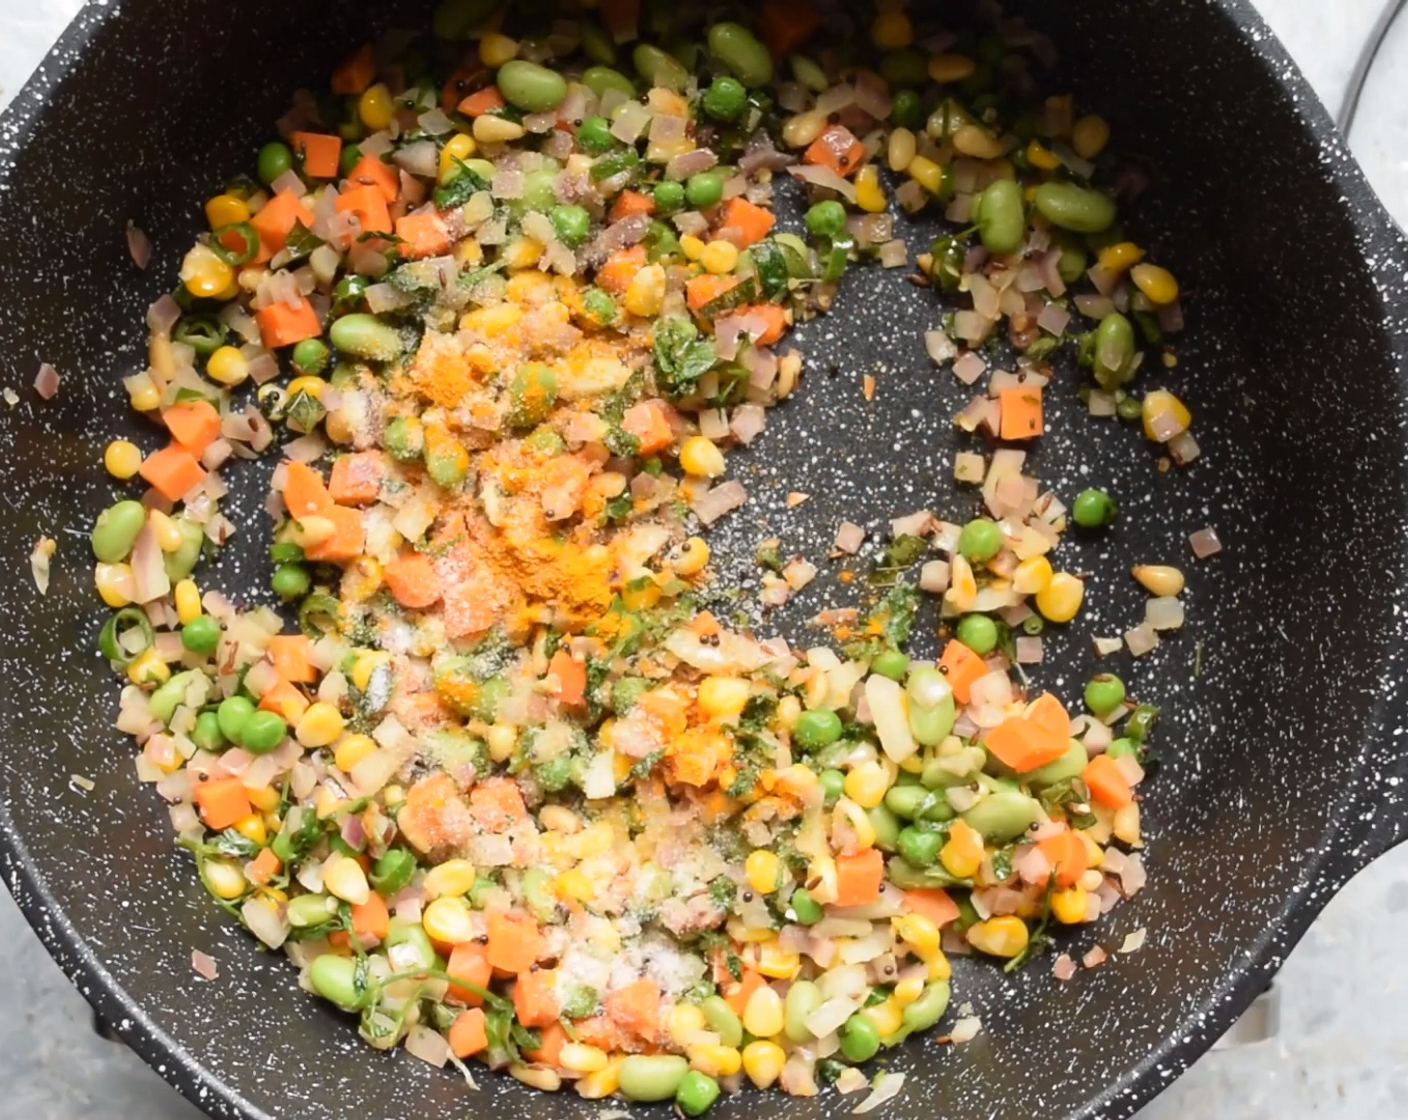 step 4 Next, add Mixed Vegetables (1 cup) along with Salt (to taste) and Ground Turmeric (1 tsp).